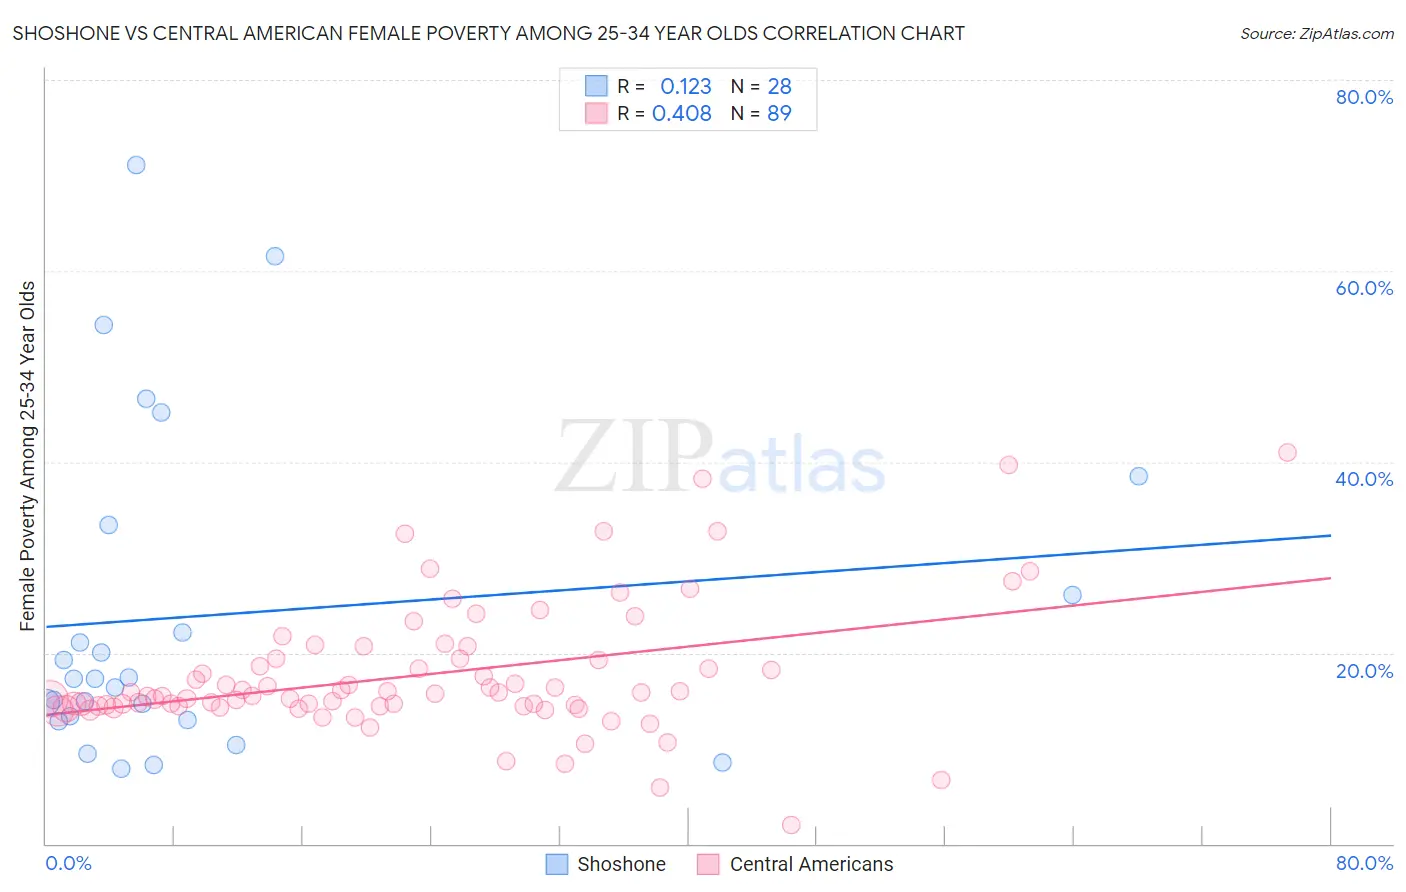 Shoshone vs Central American Female Poverty Among 25-34 Year Olds